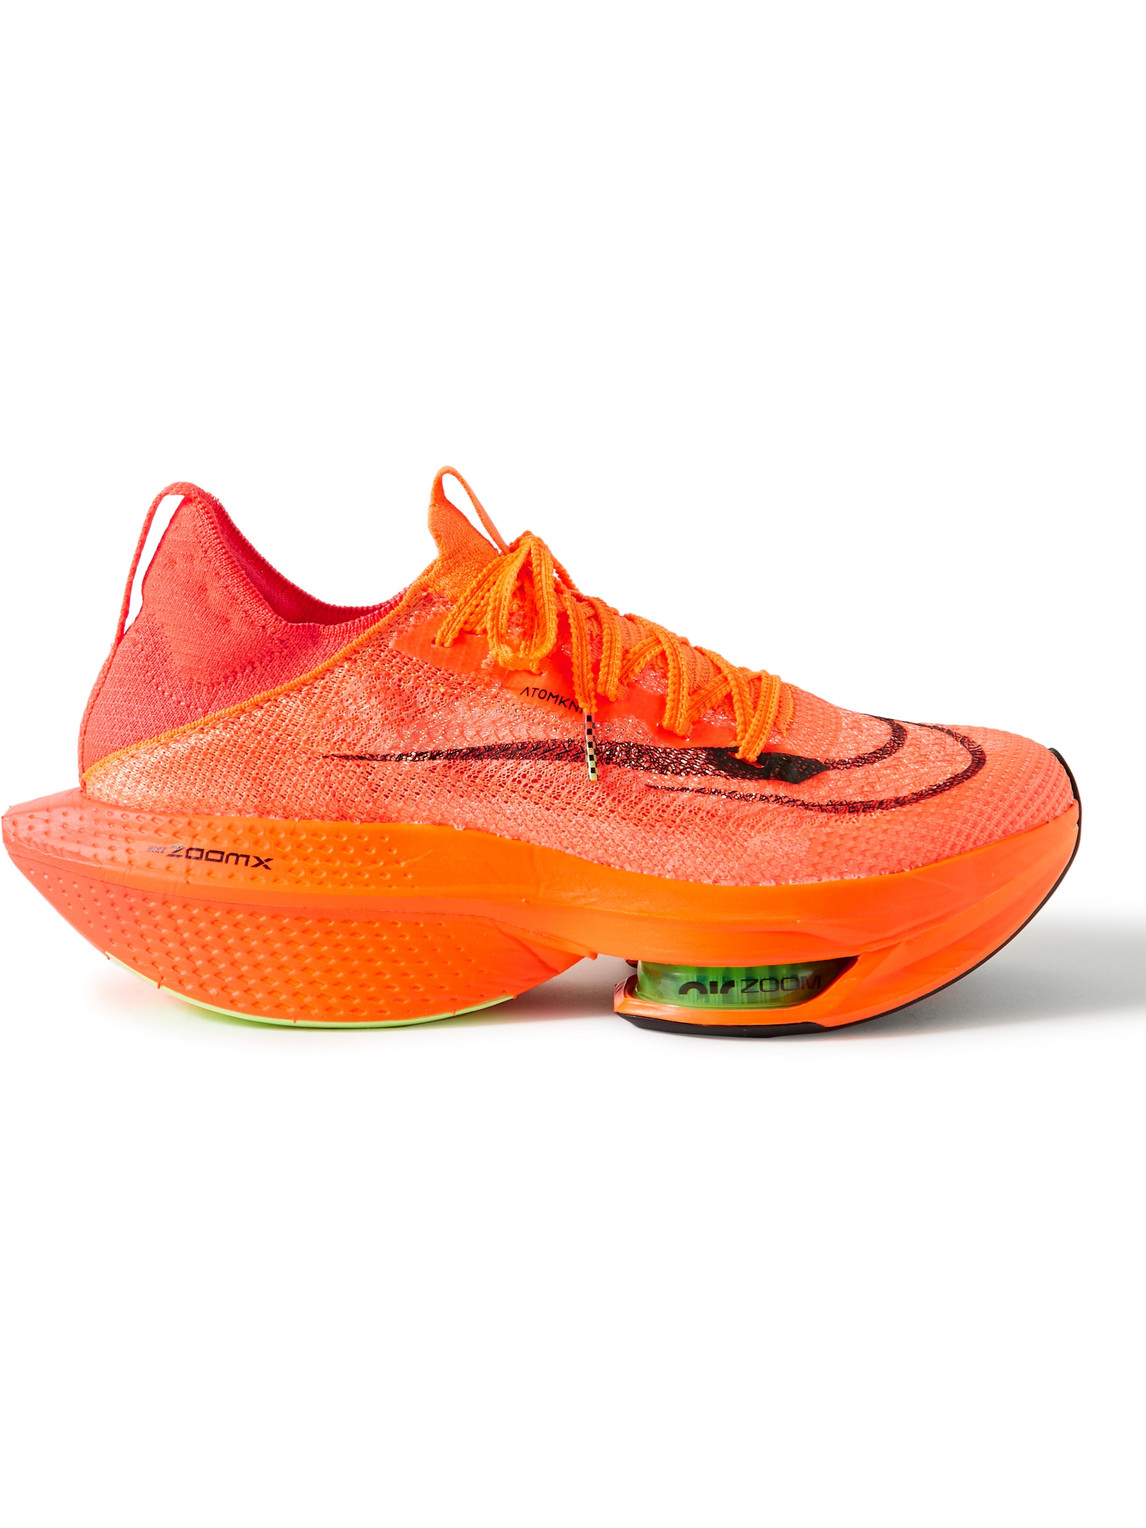 NIKE AIR ZOOM ALPHAFLY NEXT% 2 ATOMKNIT RUNNING SNEAKERS